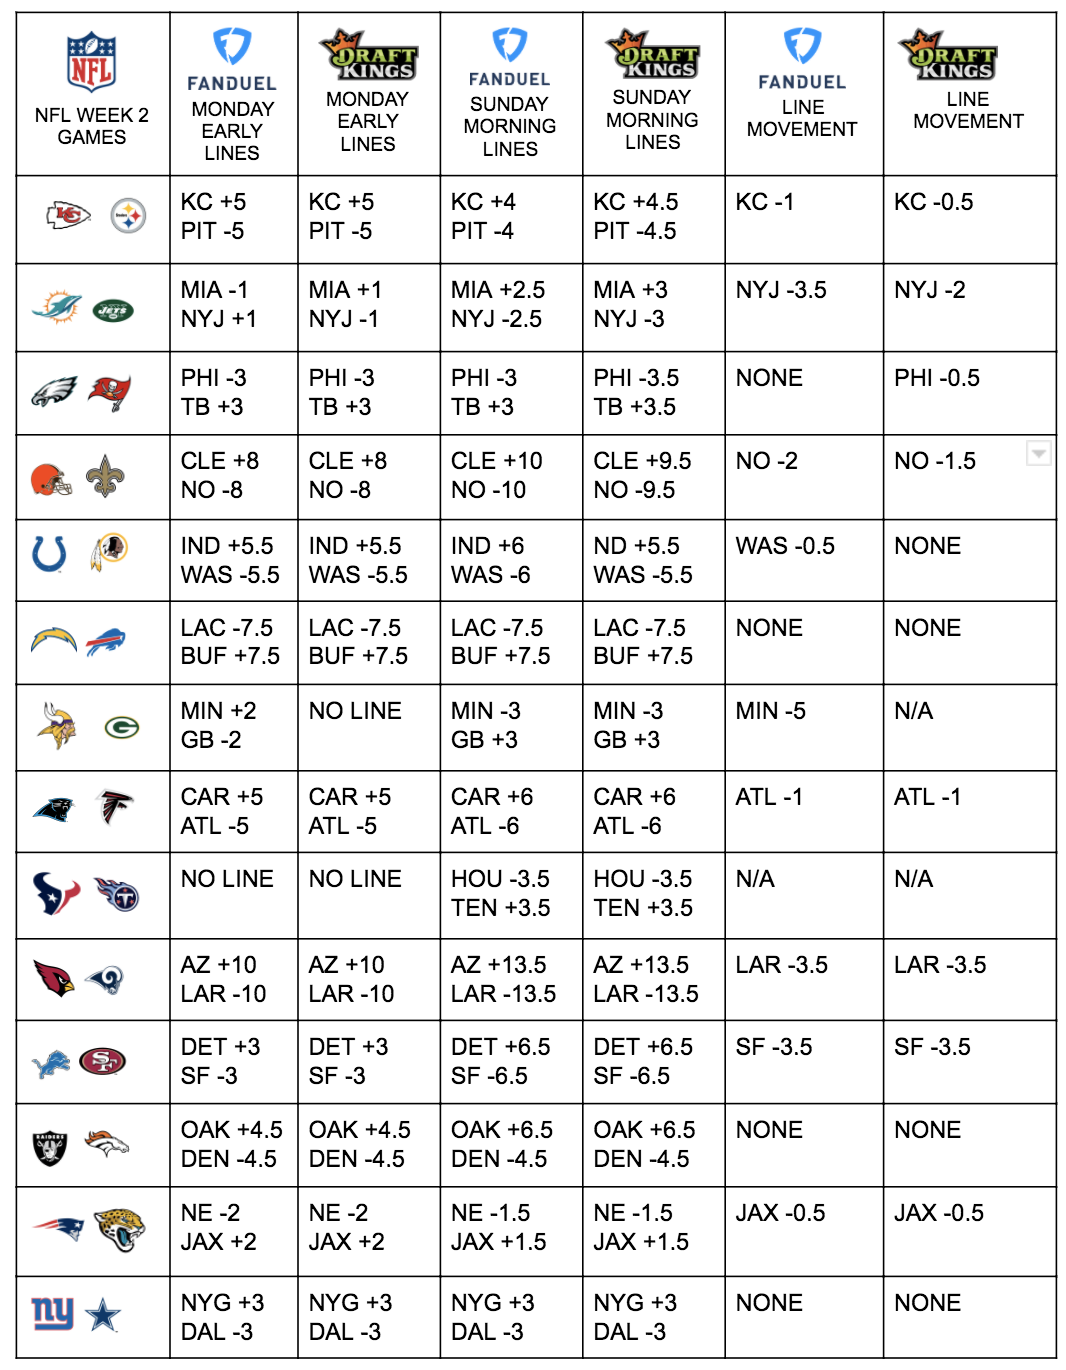 nfl week 2 matchups with spread